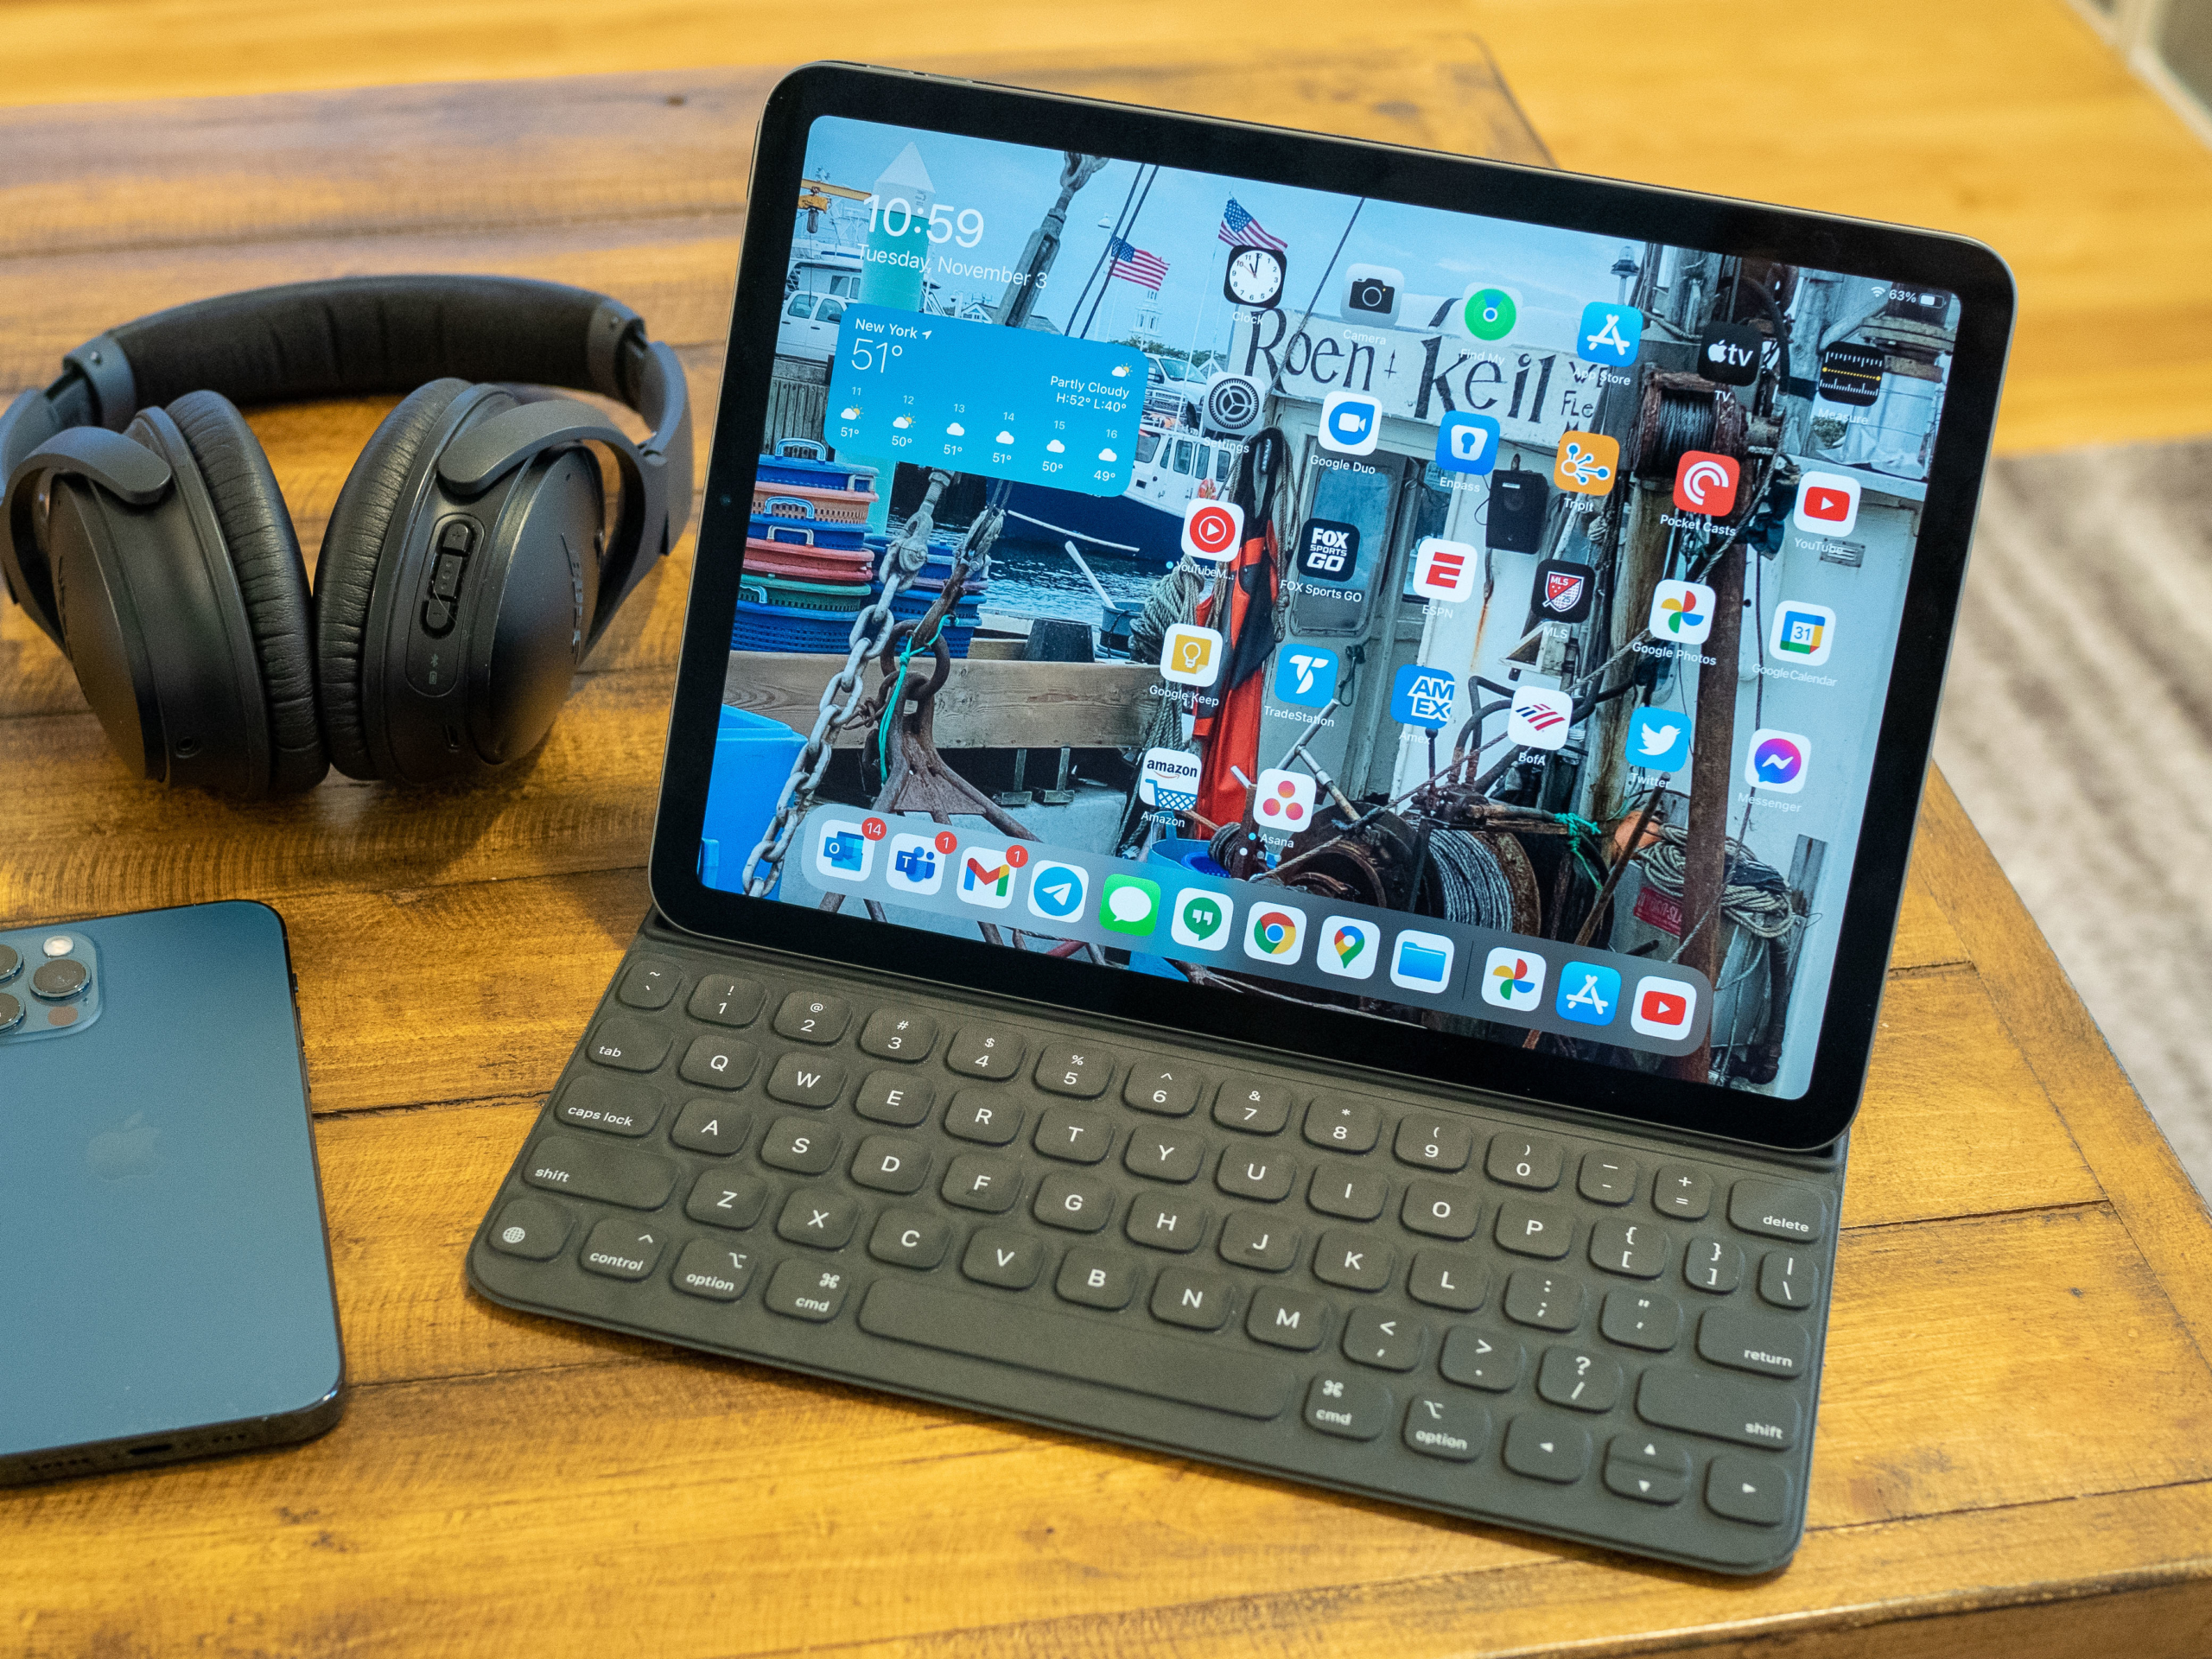 iPad (2020) vs iPad Air 4: which Apple tablet is made for you?